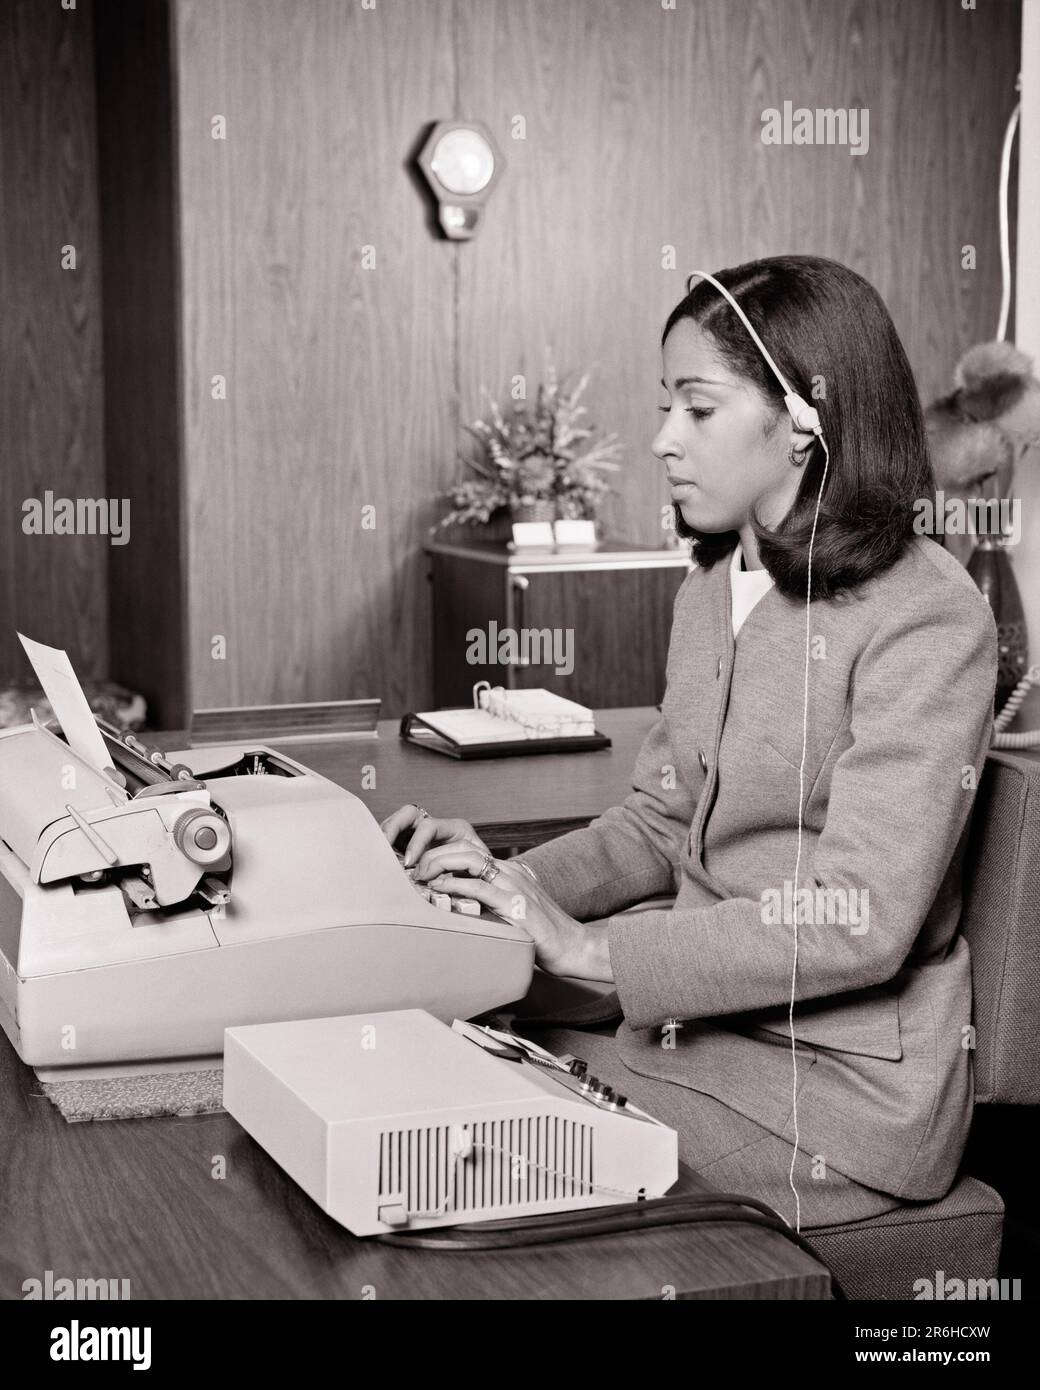 1970s AFRICAN-AMERICAN WOMAN IN OFFICE TYPING ON ELECTRIC TYPEWRITER LISTENING TO DICTATION FROM DICTAPHONE WITH HEADSET - o3035 HAR001 HARS HALF-LENGTH LADIES PERSONS CONFIDENCE B&W HEADSET DICTAPHONE SKILL OCCUPATION SKILLS TYPING AFRICAN-AMERICANS AFRICAN-AMERICAN BLACK ETHNICITY OFFICE WORKER OCCUPATIONS GAL FRIDAY ADMINISTRATOR LISTING SECRETARIES STYLISH SUPPORT AMANUENSIS DICTATION RECORDED YOUNG ADULT WOMAN BLACK AND WHITE CLERICAL HAR001 OLD FASHIONED TYPIST AFRICAN AMERICANS Stock Photo